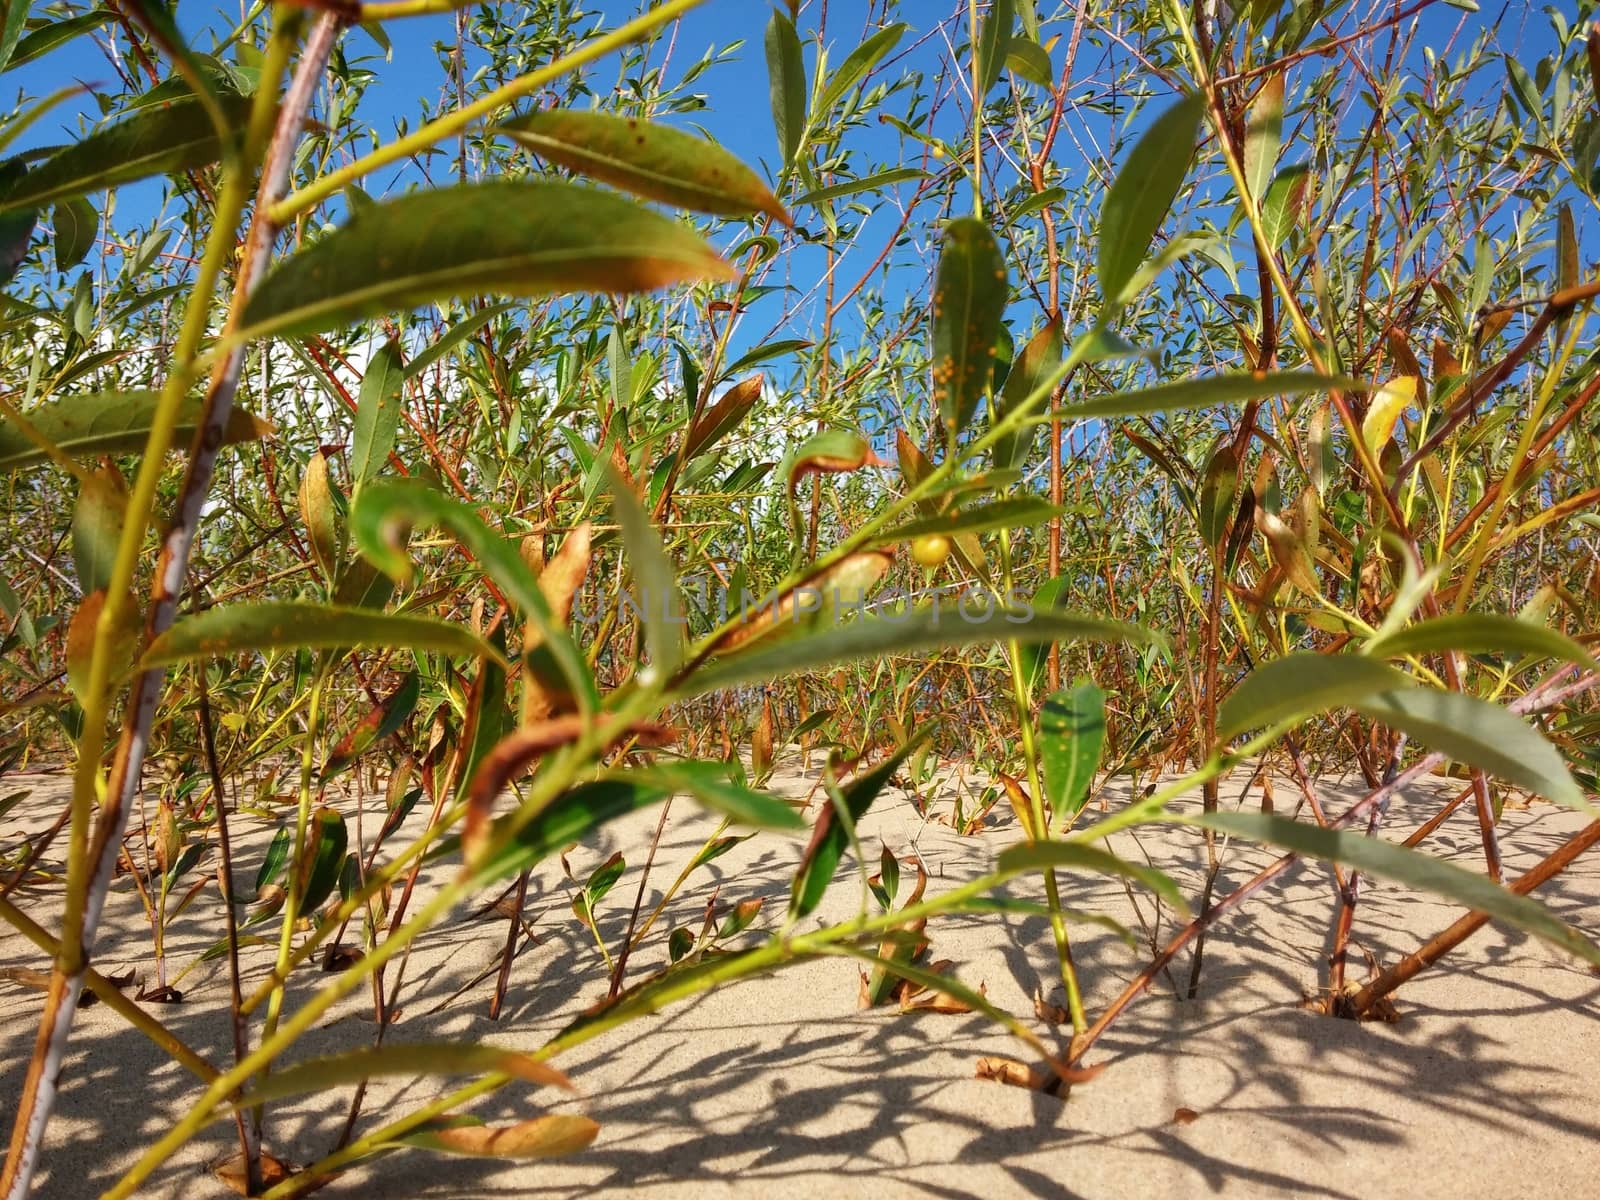 Plants growing at the Baltic beach in Summer